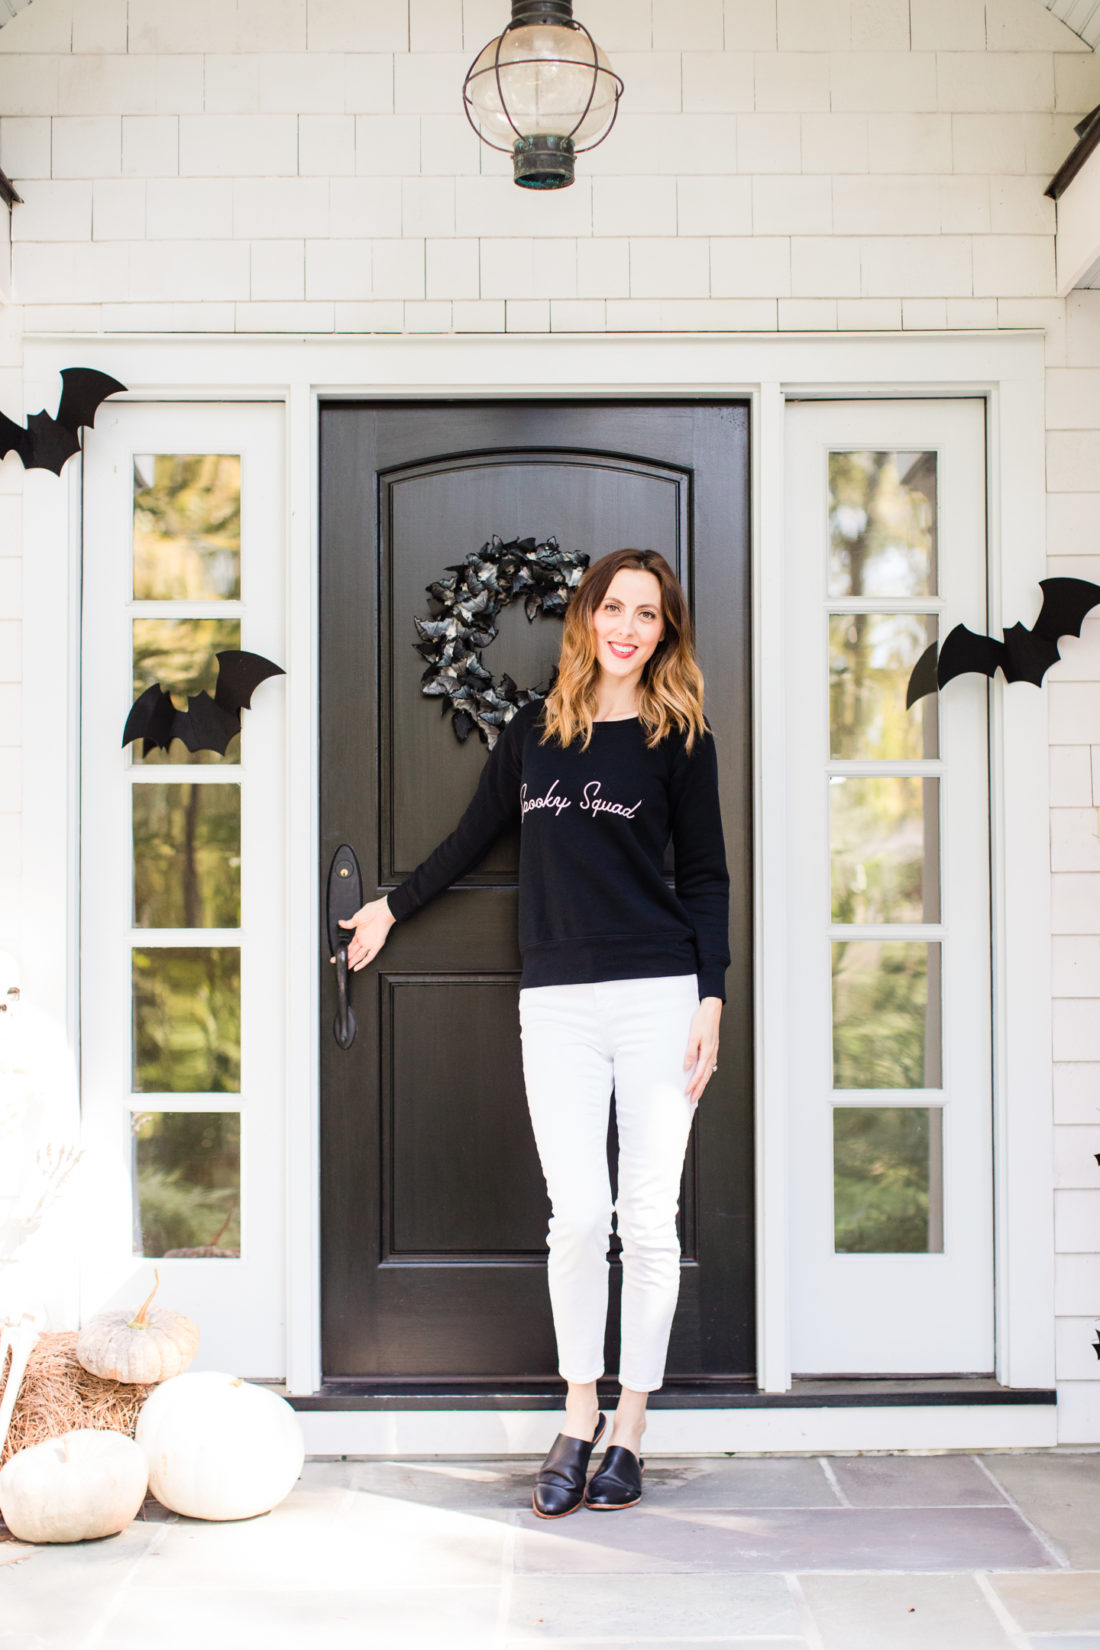 Eva Amurri Martino stands at the entryway to her Connecticut home that is decorated with a spooky bat theme for Halloween